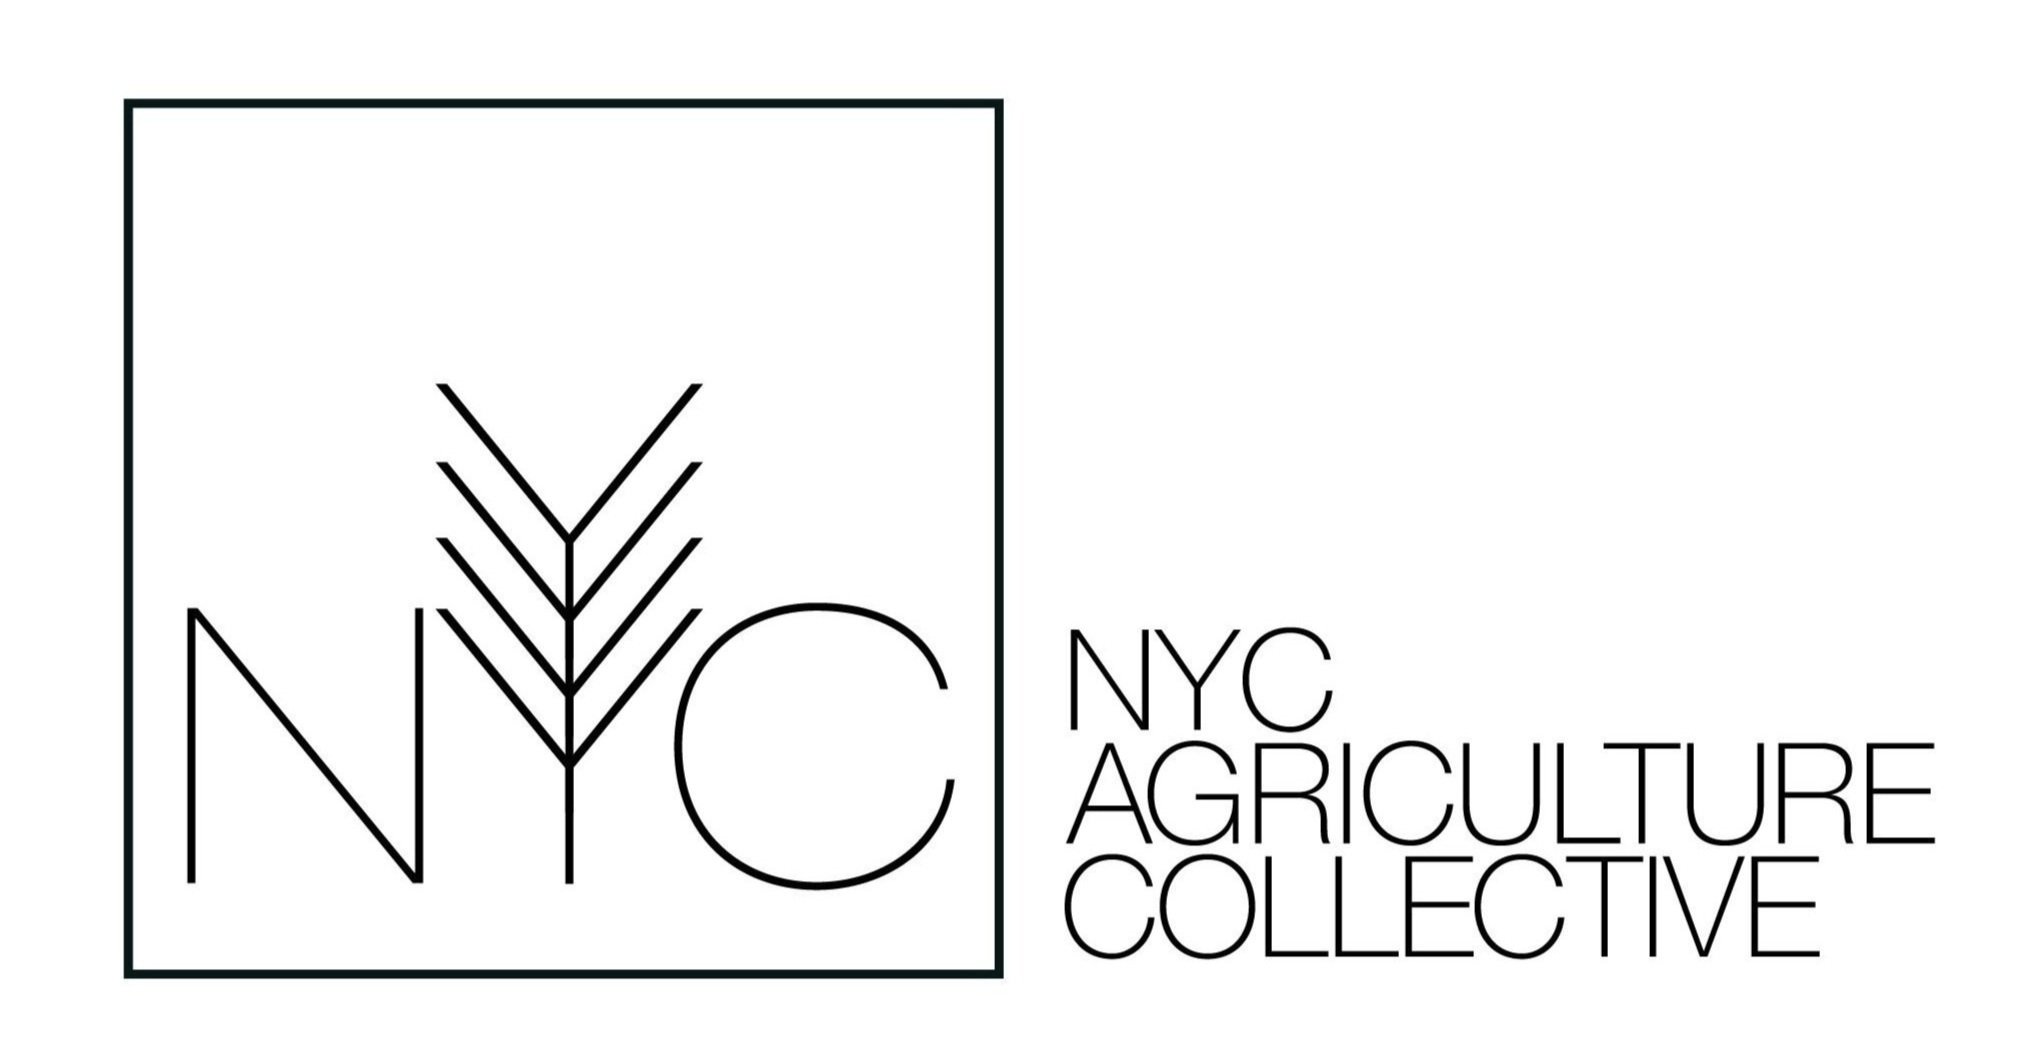 NYC Agriculture Collective